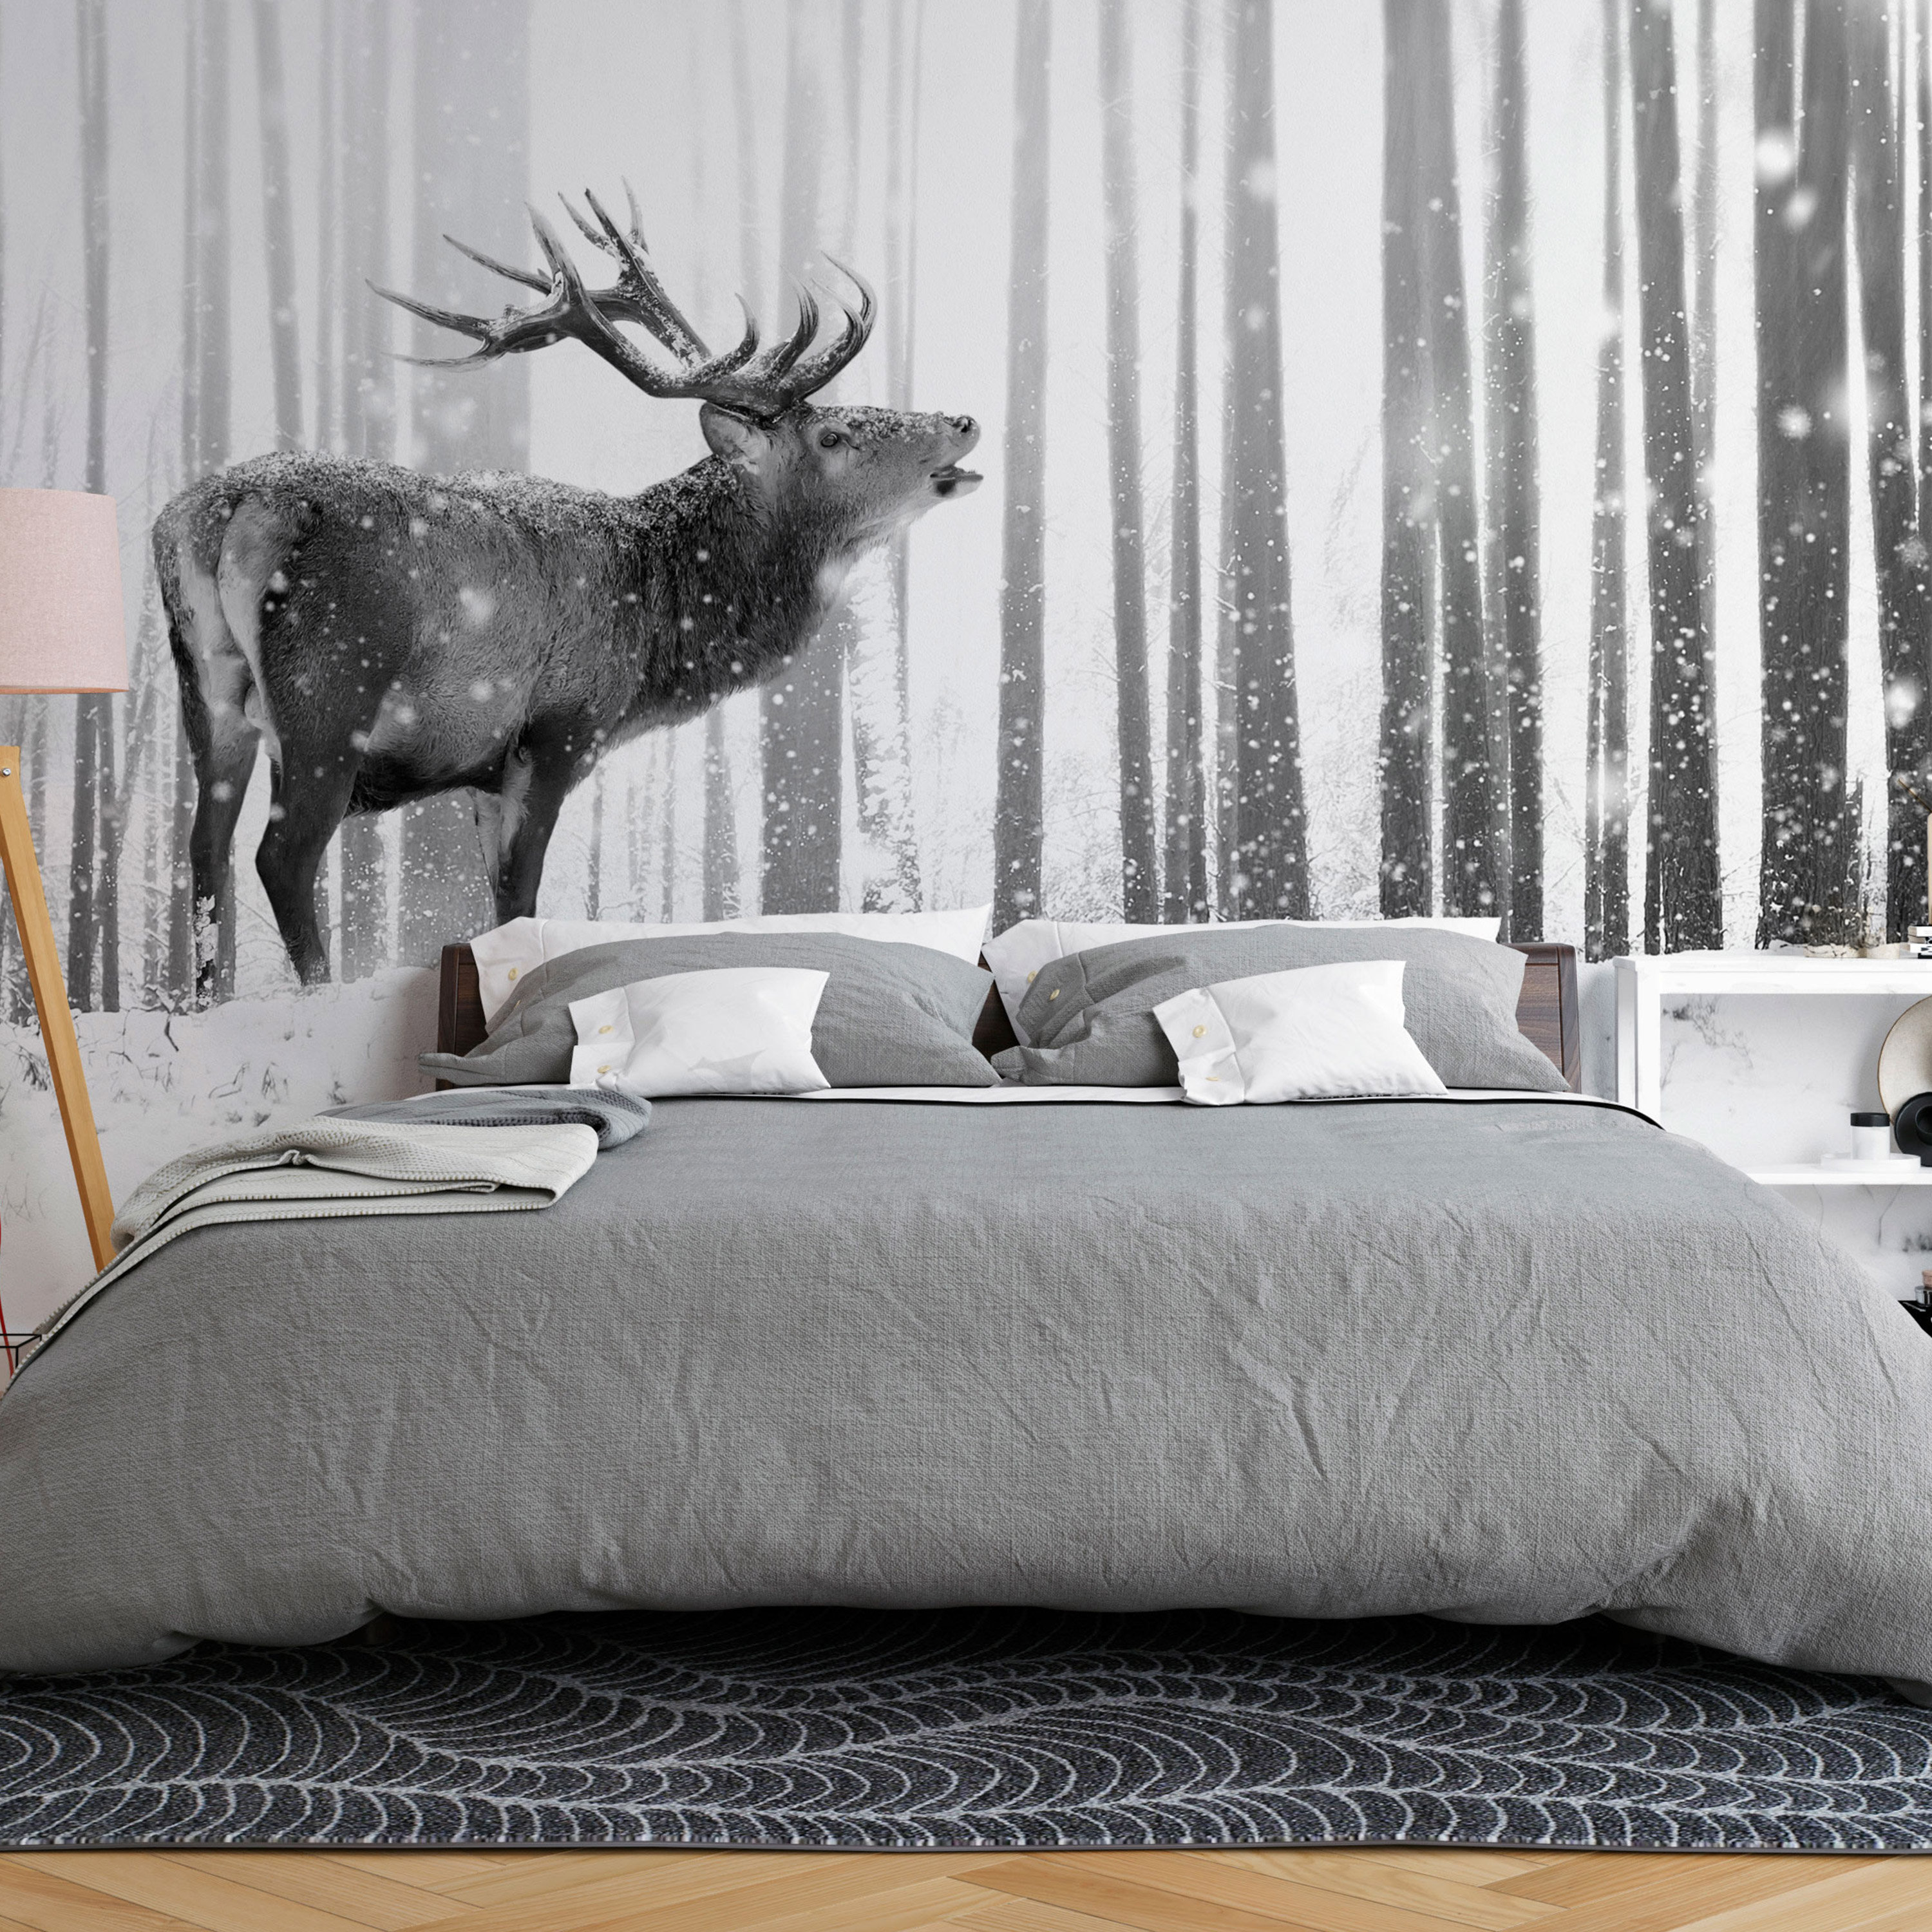 Self-adhesive Wallpaper - Deer in the Snow (Black and White) - 392x280